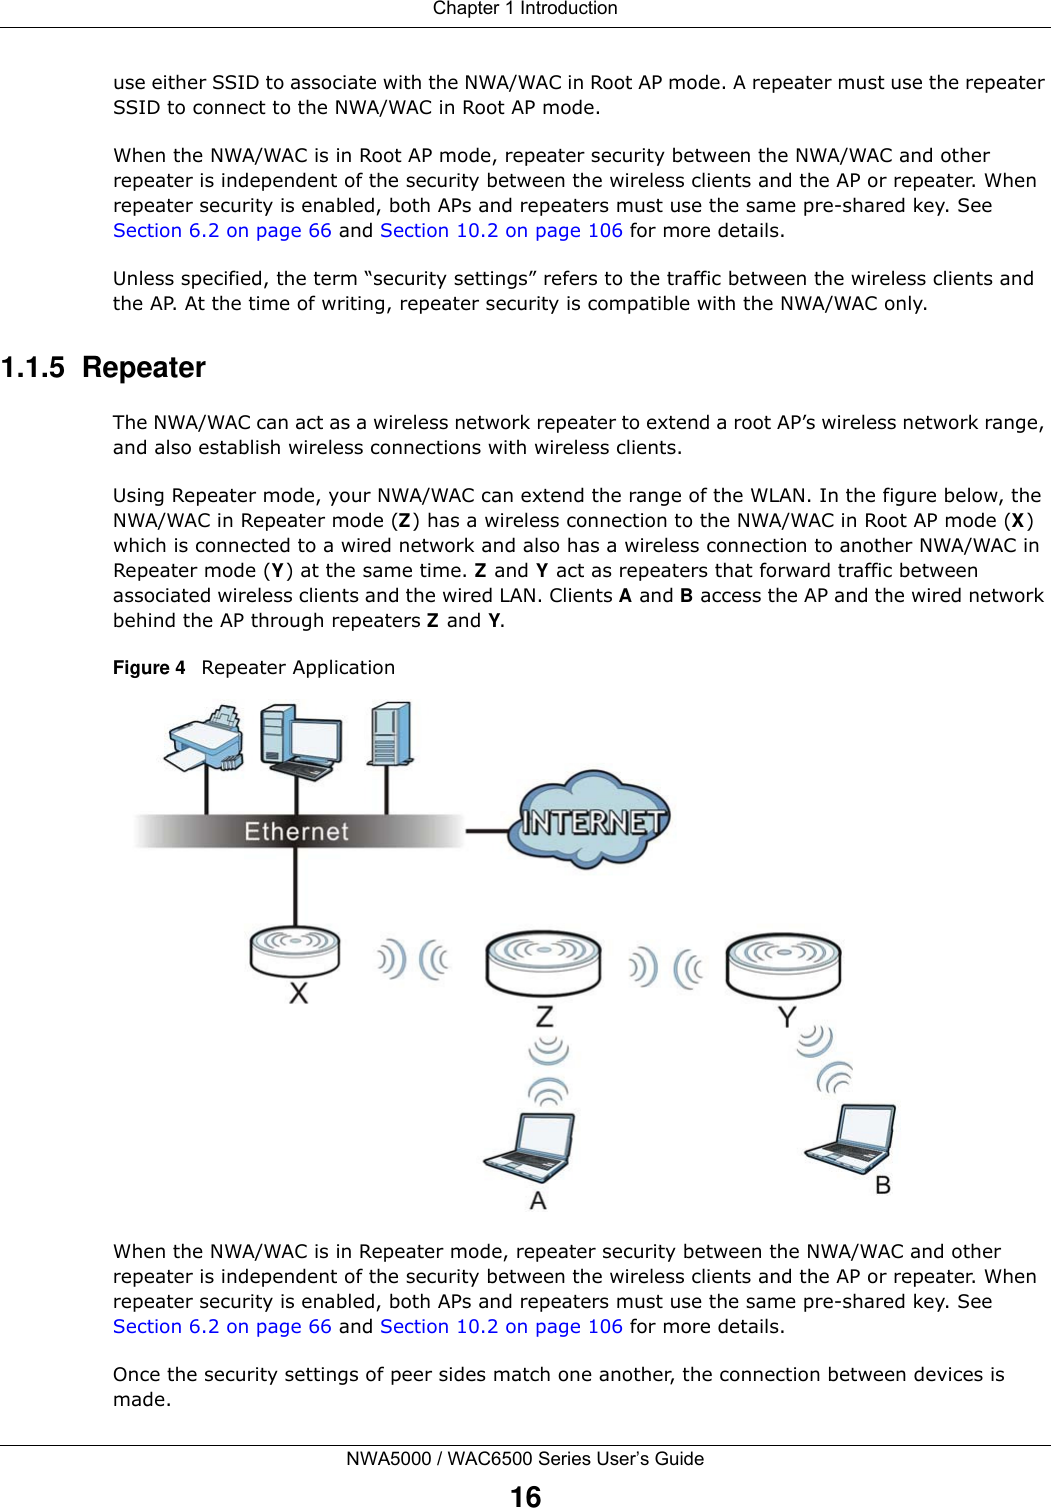 Chapter 1 IntroductionNWA5000 / WAC6500 Series User’s Guide16use either SSID to associate with the NWA/WAC in Root AP mode. A repeater must use the repeater SSID to connect to the NWA/WAC in Root AP mode.When the NWA/WAC is in Root AP mode, repeater security between the NWA/WAC and other repeater is independent of the security between the wireless clients and the AP or repeater. When repeater security is enabled, both APs and repeaters must use the same pre-shared key. See Section 6.2 on page 66 and Section 10.2 on page 106 for more details.Unless specified, the term “security settings” refers to the traffic between the wireless clients and the AP. At the time of writing, repeater security is compatible with the NWA/WAC only. 1.1.5  RepeaterThe NWA/WAC can act as a wireless network repeater to extend a root AP’s wireless network range, and also establish wireless connections with wireless clients. Using Repeater mode, your NWA/WAC can extend the range of the WLAN. In the figure below, the NWA/WAC in Repeater mode (Z) has a wireless connection to the NWA/WAC in Root AP mode (X) which is connected to a wired network and also has a wireless connection to another NWA/WAC in Repeater mode (Y) at the same time. Z and Y act as repeaters that forward traffic between associated wireless clients and the wired LAN. Clients A and B access the AP and the wired network behind the AP through repeaters Z and Y.Figure 4   Repeater ApplicationWhen the NWA/WAC is in Repeater mode, repeater security between the NWA/WAC and other repeater is independent of the security between the wireless clients and the AP or repeater. When repeater security is enabled, both APs and repeaters must use the same pre-shared key. See Section 6.2 on page 66 and Section 10.2 on page 106 for more details. Once the security settings of peer sides match one another, the connection between devices is made.